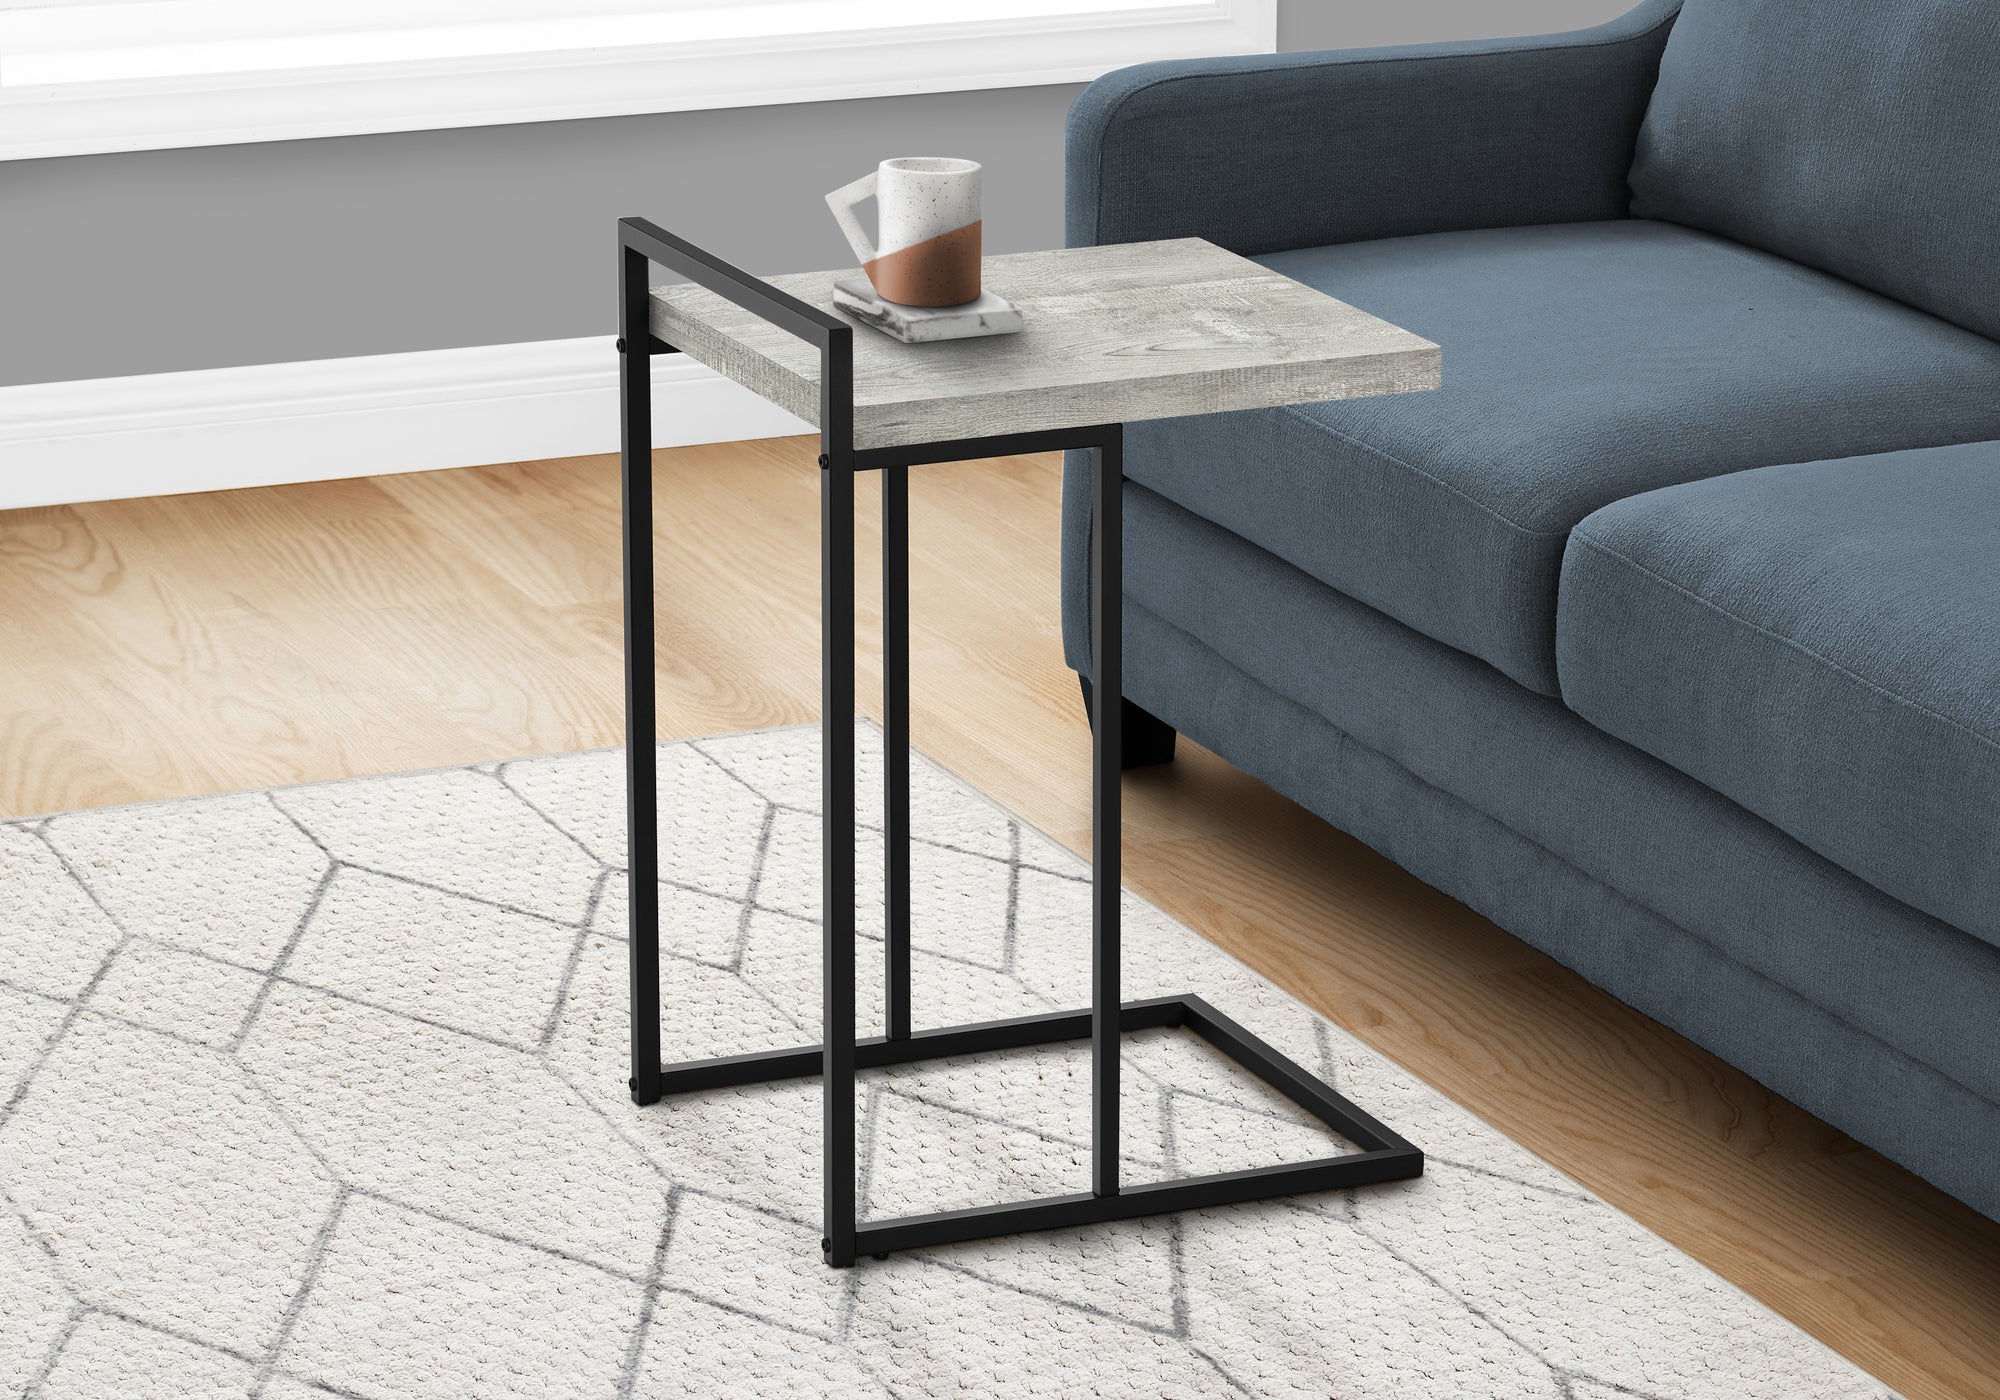 MN-803631    Accent Table, C-Shaped, End, Side, Snack, Living Room, Bedroom, Metal Frame, Laminate, Grey Reclaimed Wood Look, Black, Contemporary, Industrial, Modern